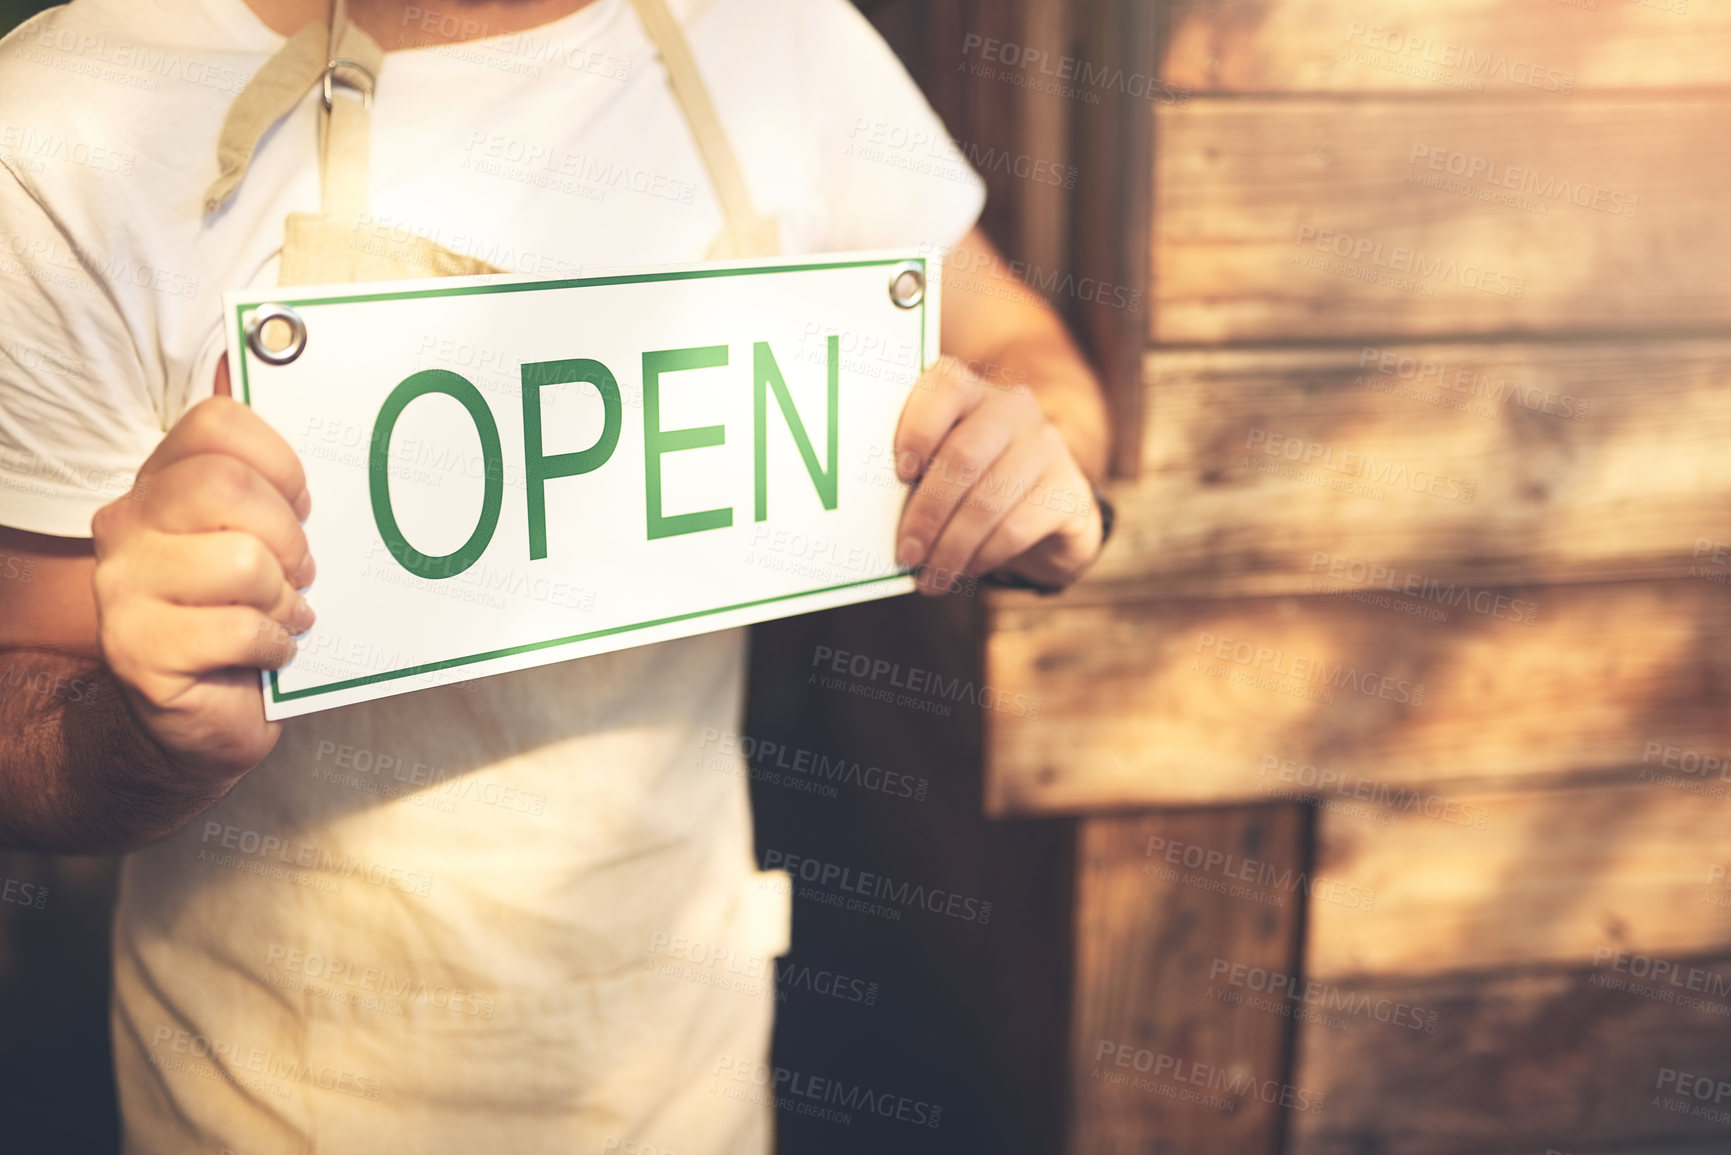 Buy stock photo Cropped shot of an unrecognizable business owner holding up a sign in the doorway of his coffee shop